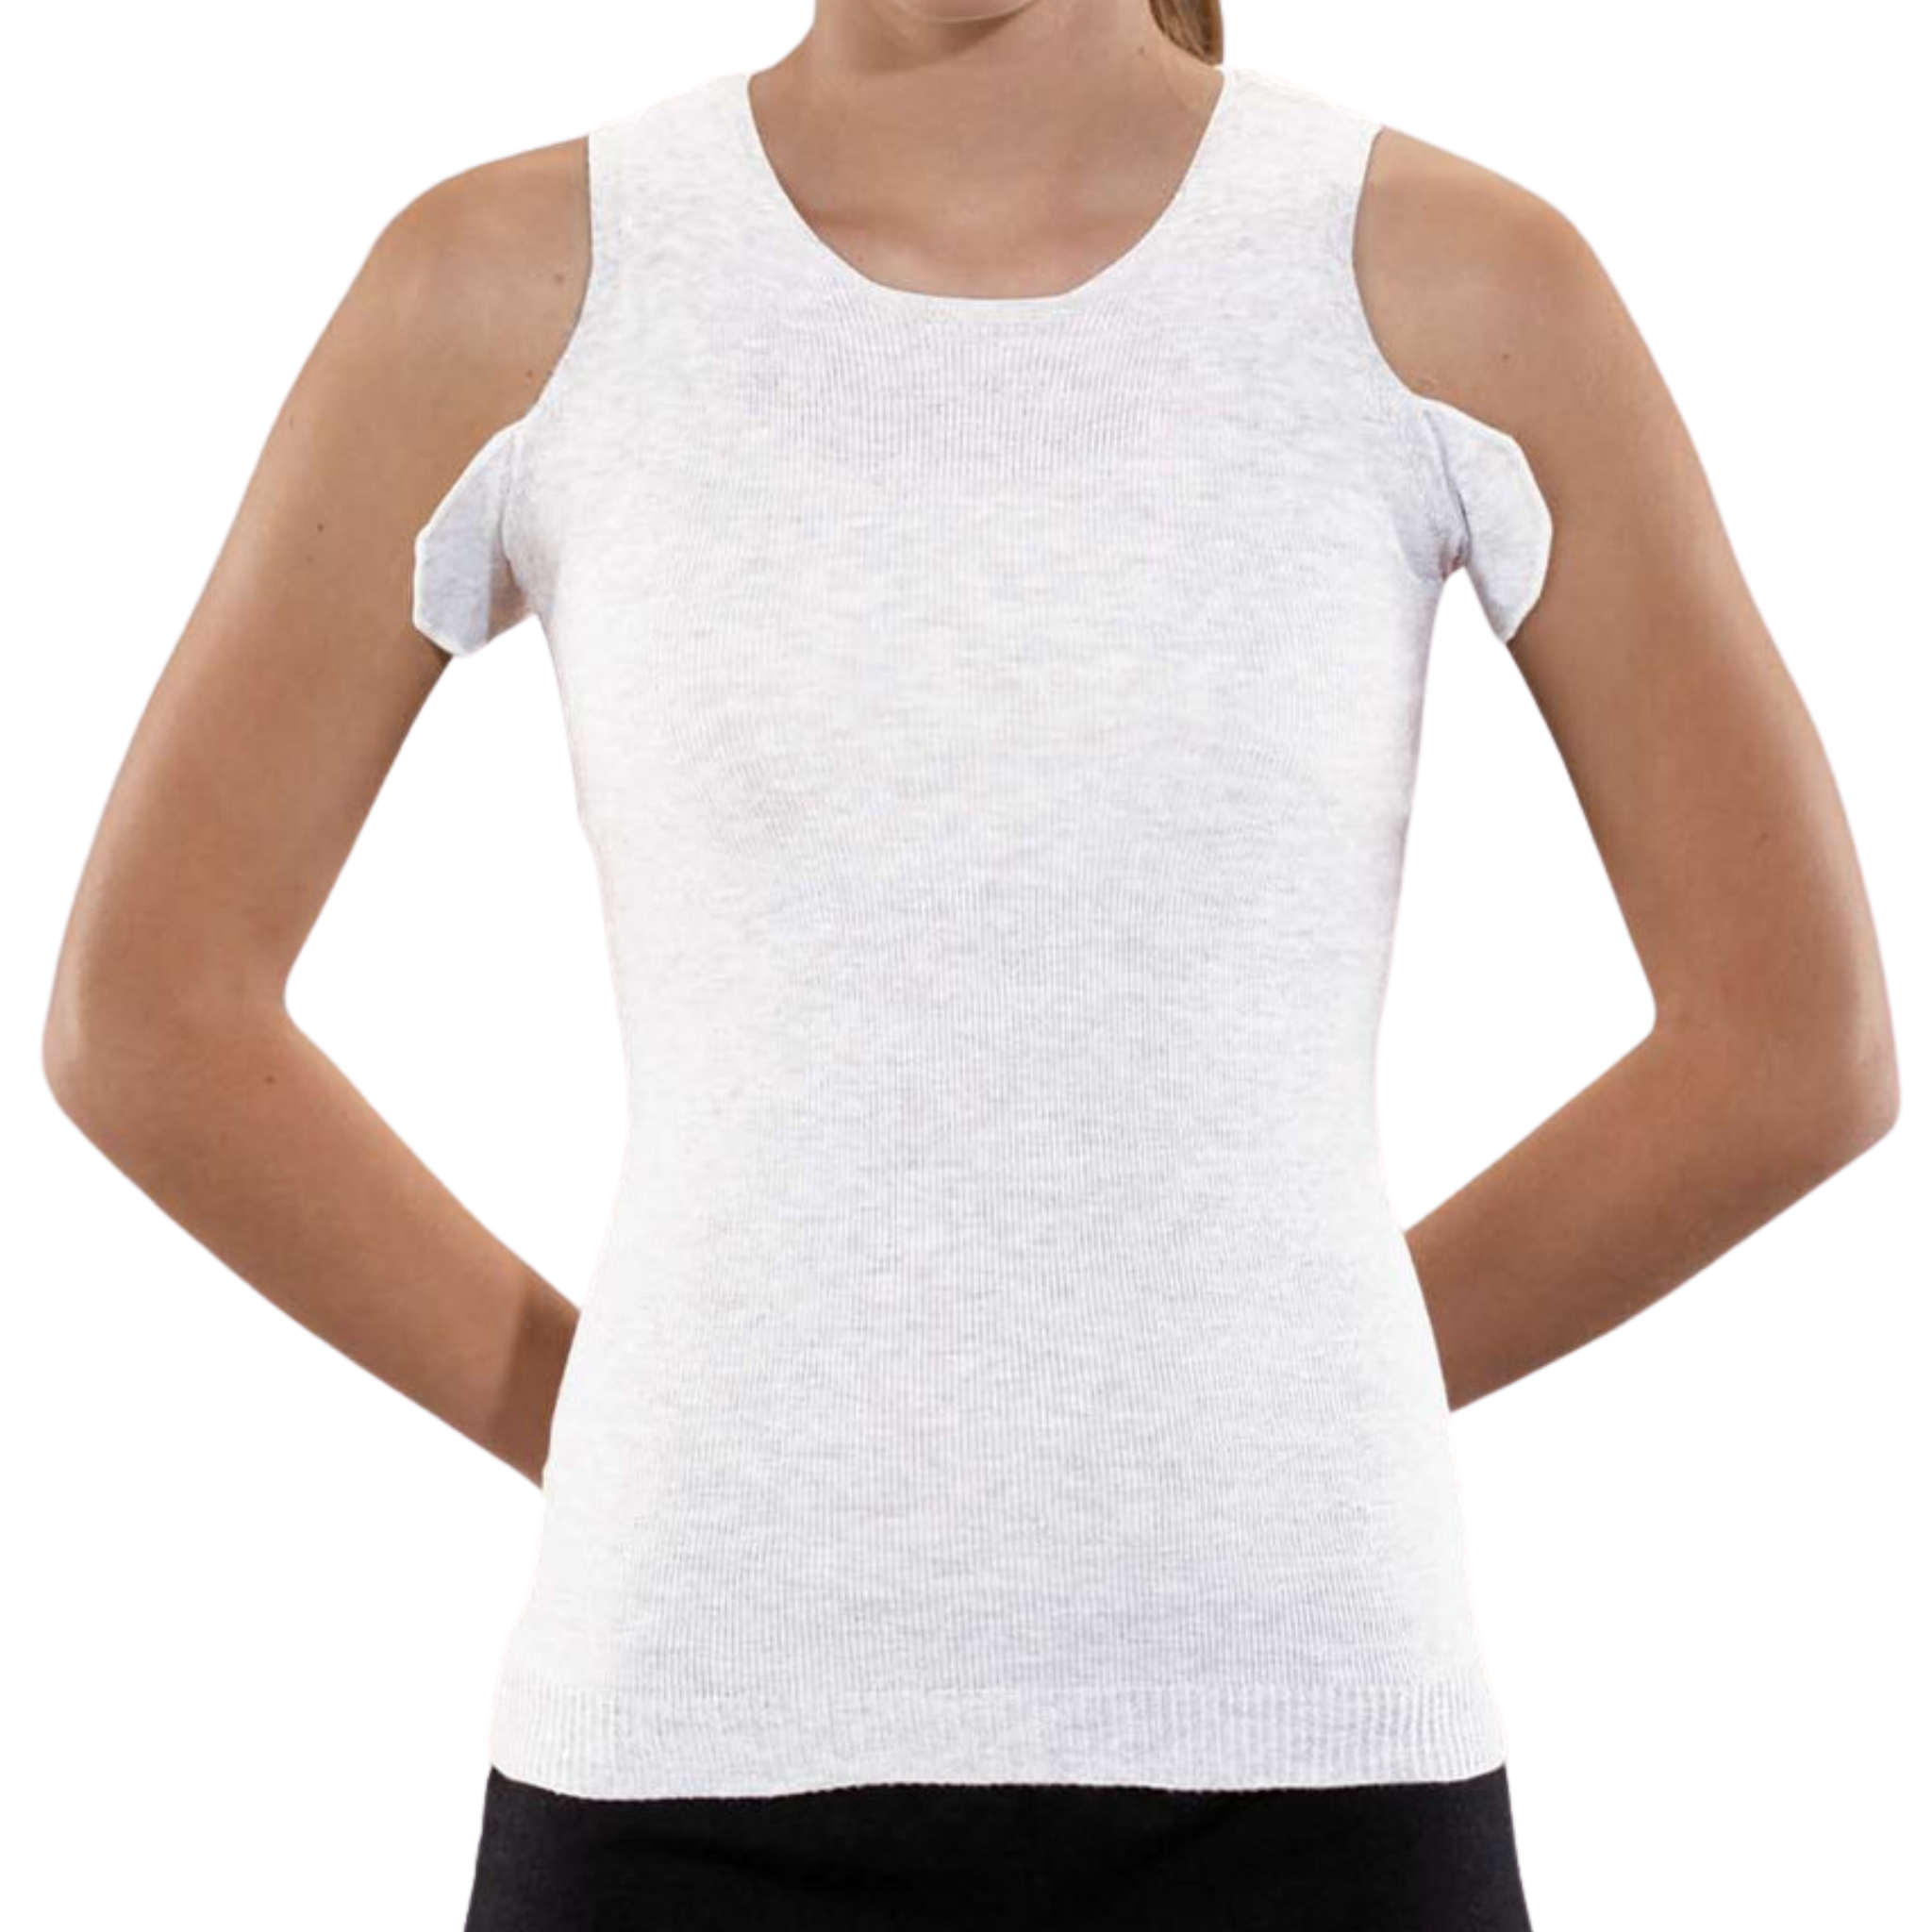 Knit-Rite - Unisex Seamless Vest Torso Interface for Brace - Crew Neck with Double Axilla Flaps